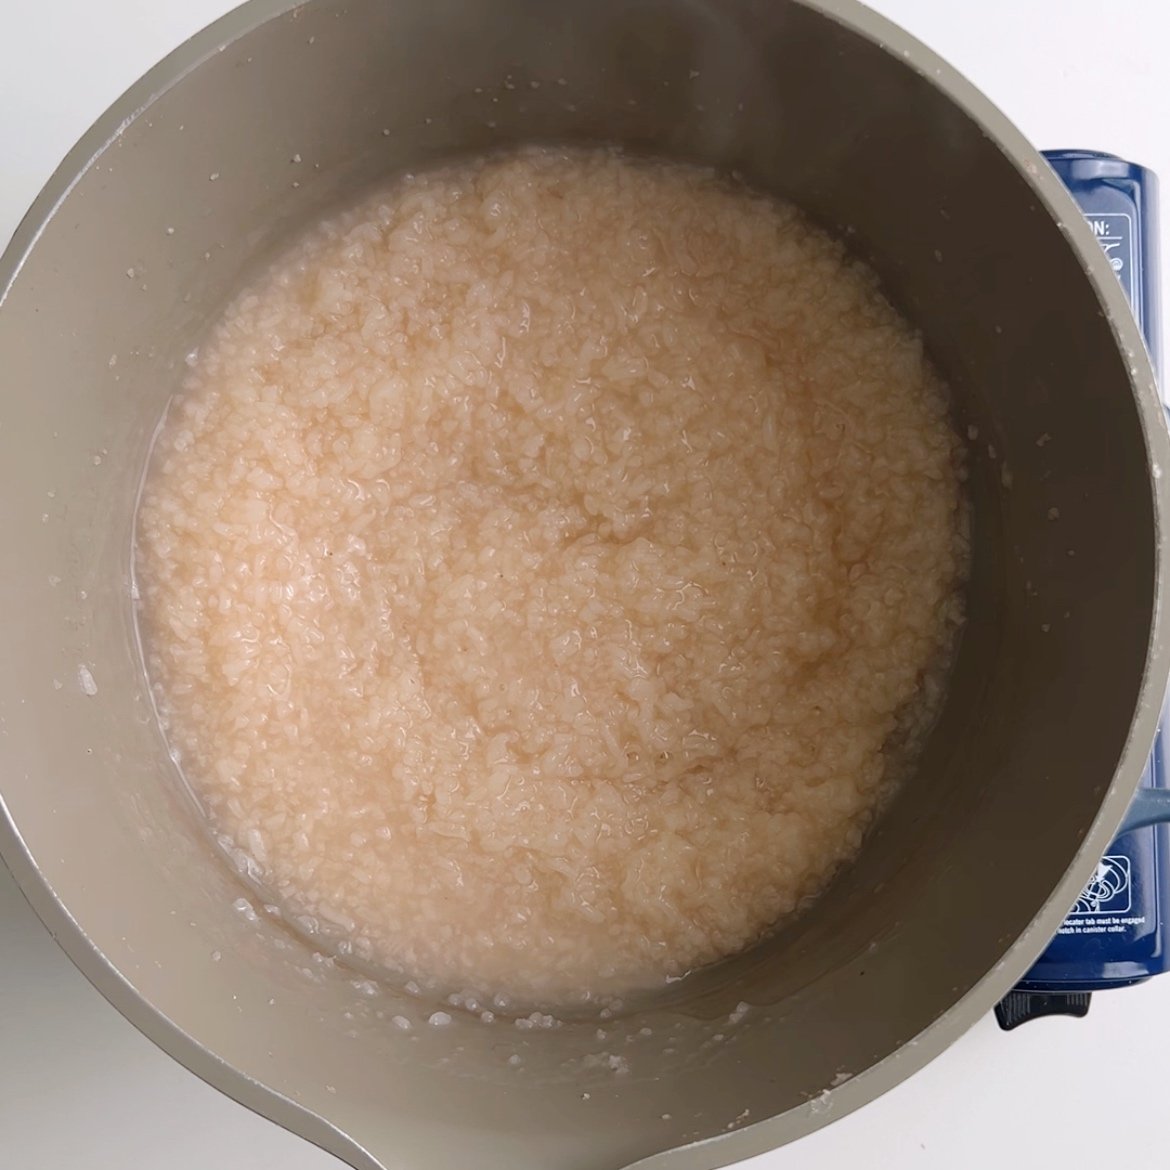 Cooked broken rice in a gray pot